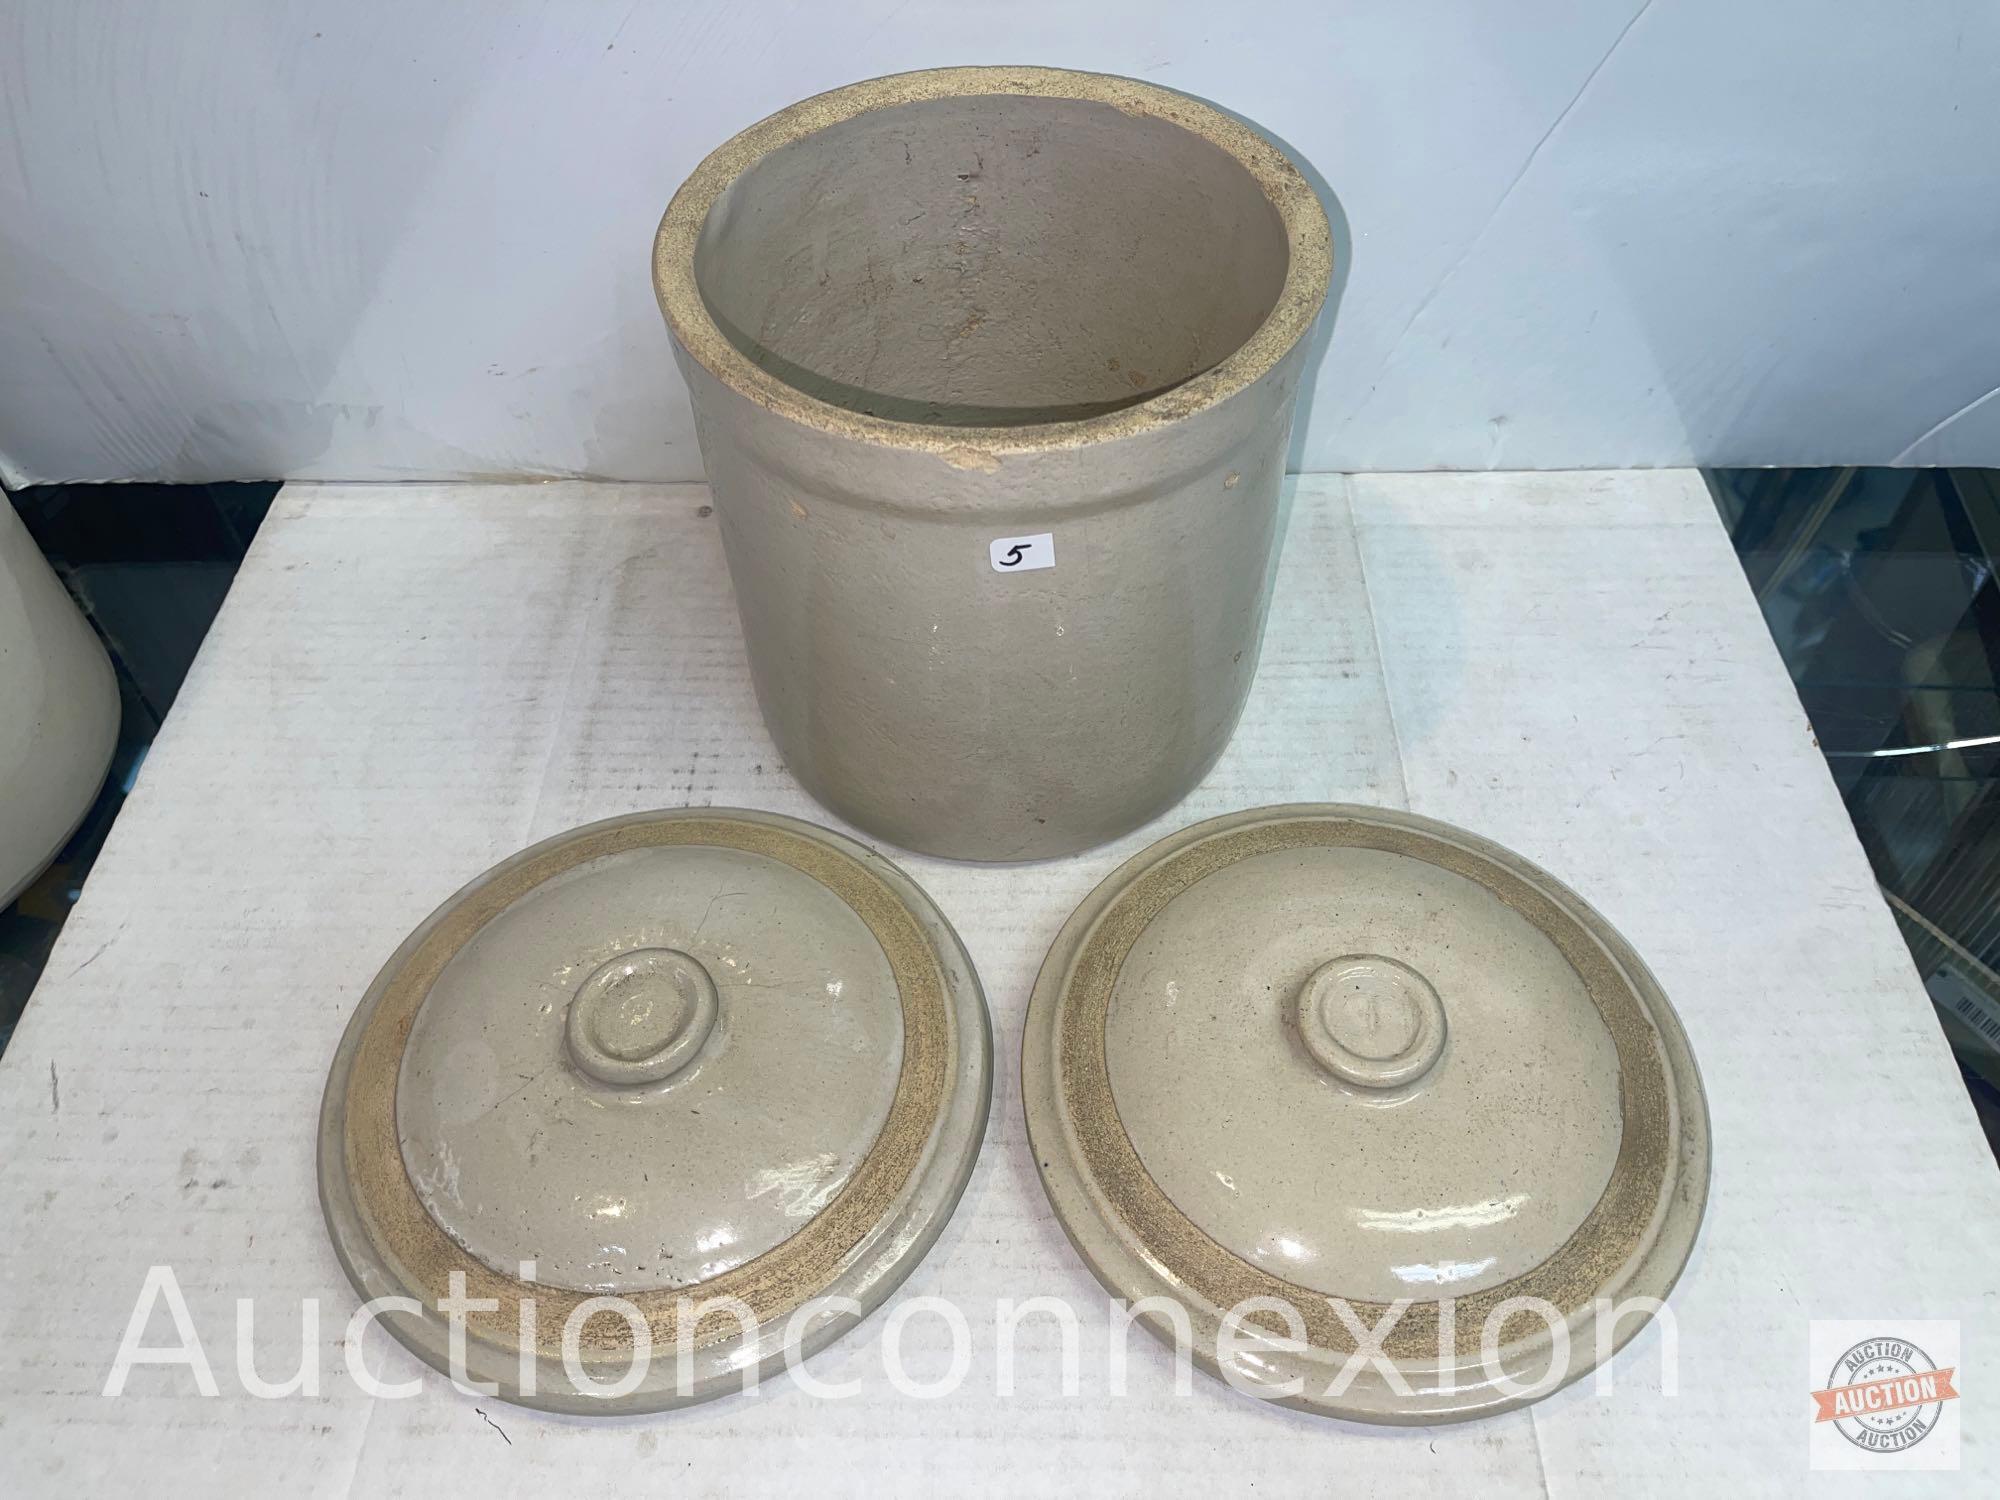 Crock - Vintage crock with lid and extra lid